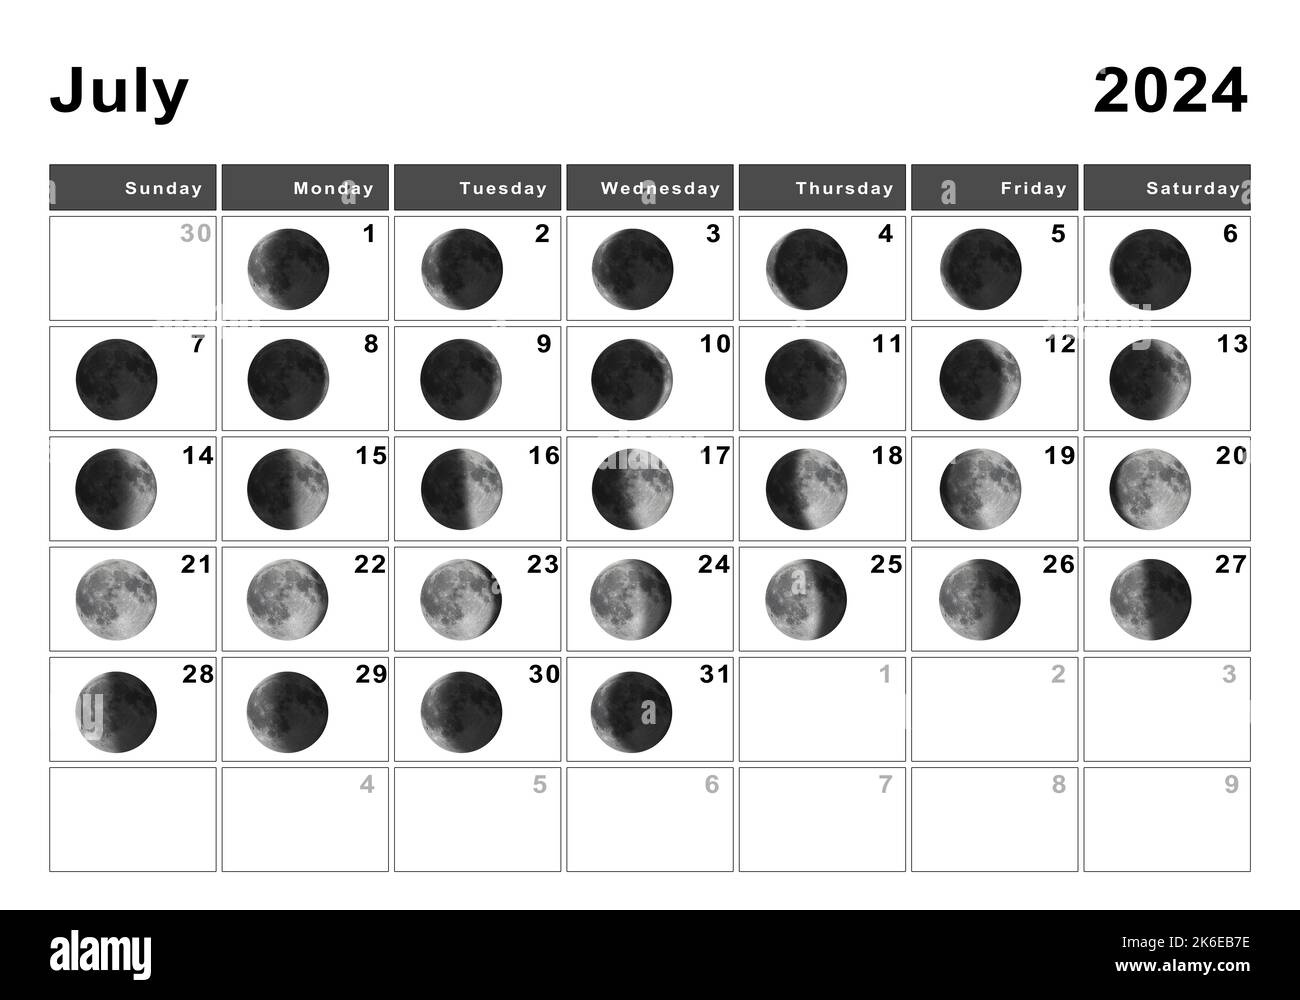 July 2024 Lunar Calendar, Moon Cycles, Moon Phases Stock Photo - Alamy pertaining to July 12 Lunar Calendar 2024